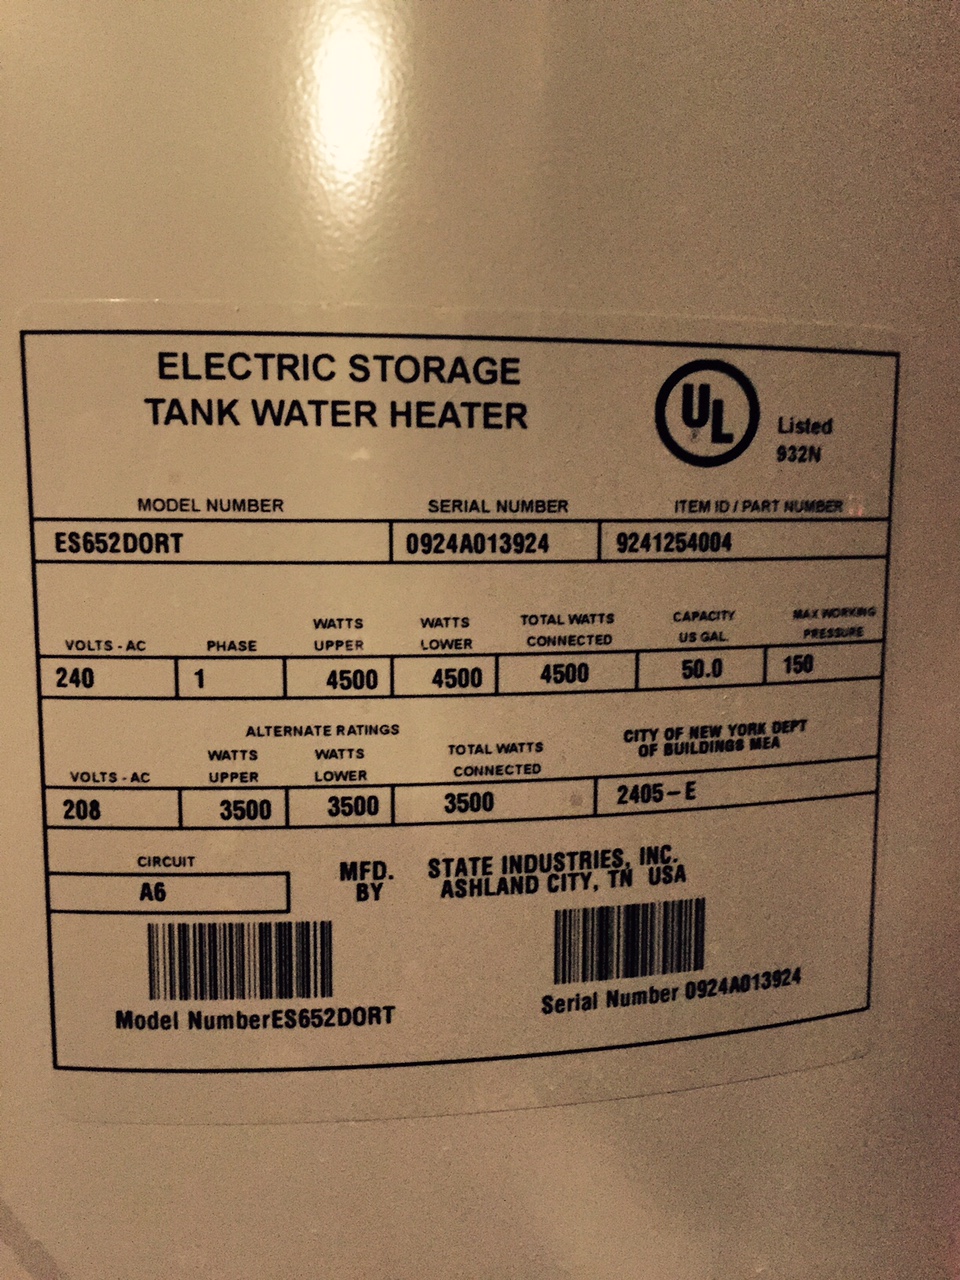 age of water heater by serial number